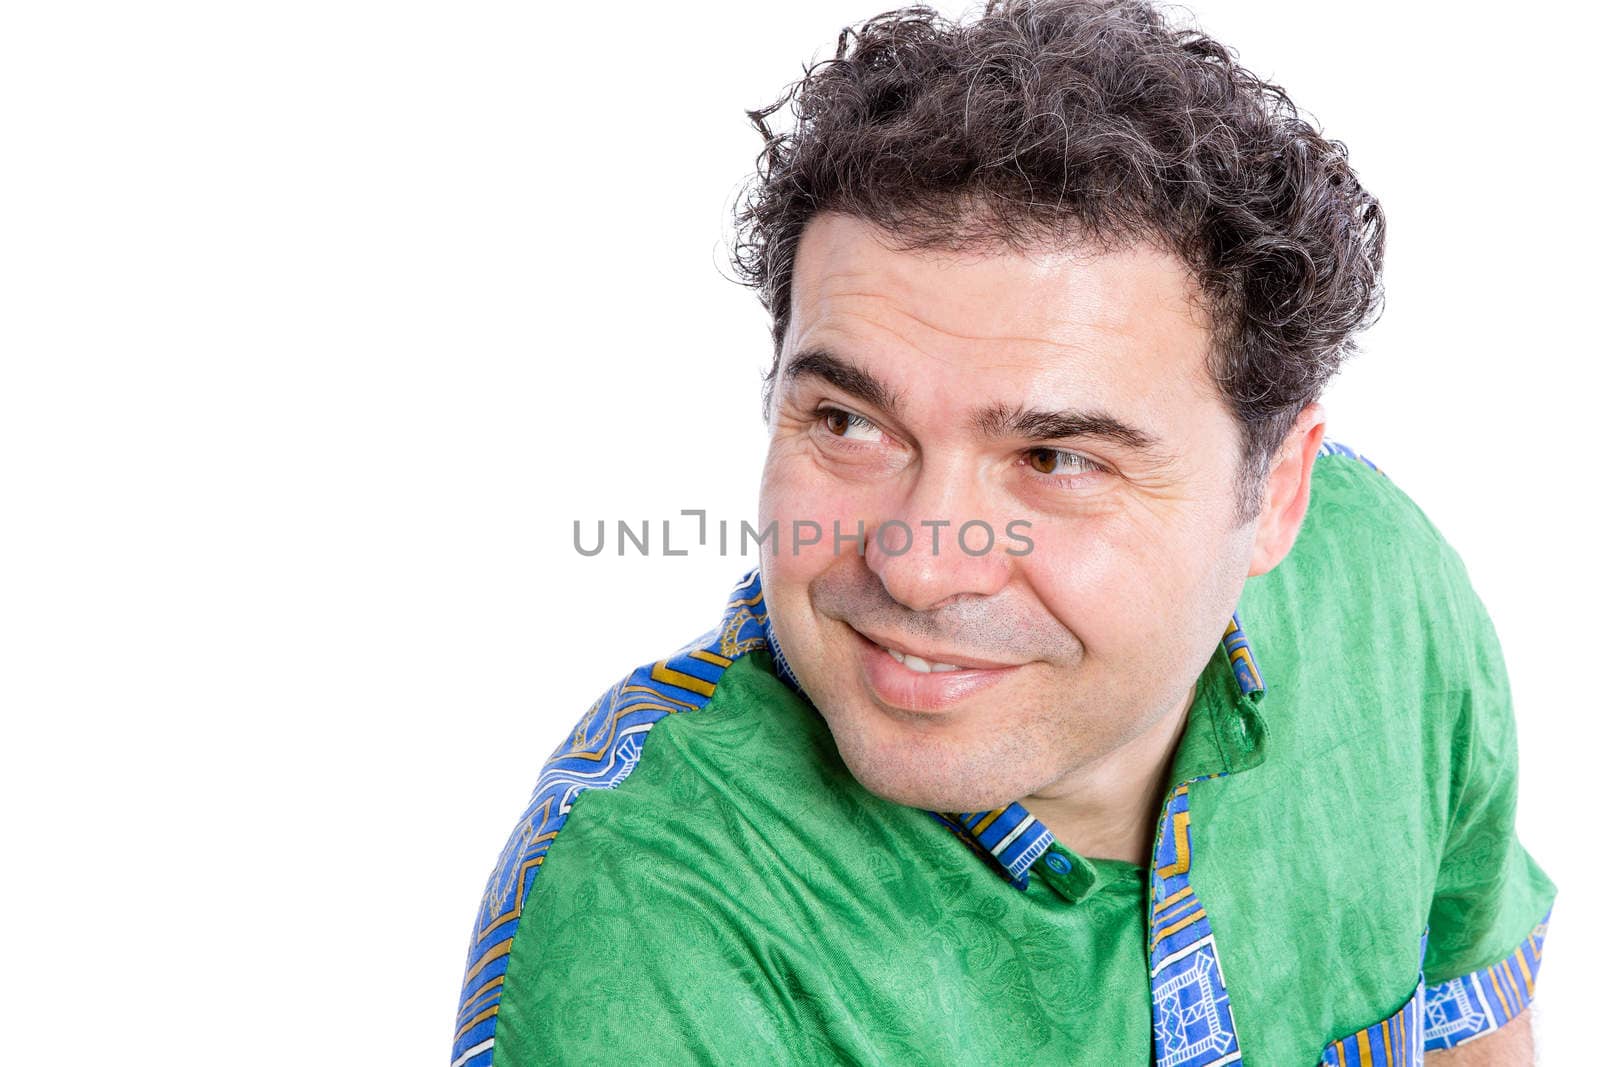 Close up Middle Aged Man Wearing African Shirt, Looking Sideways with Smiling Face Against White Background.